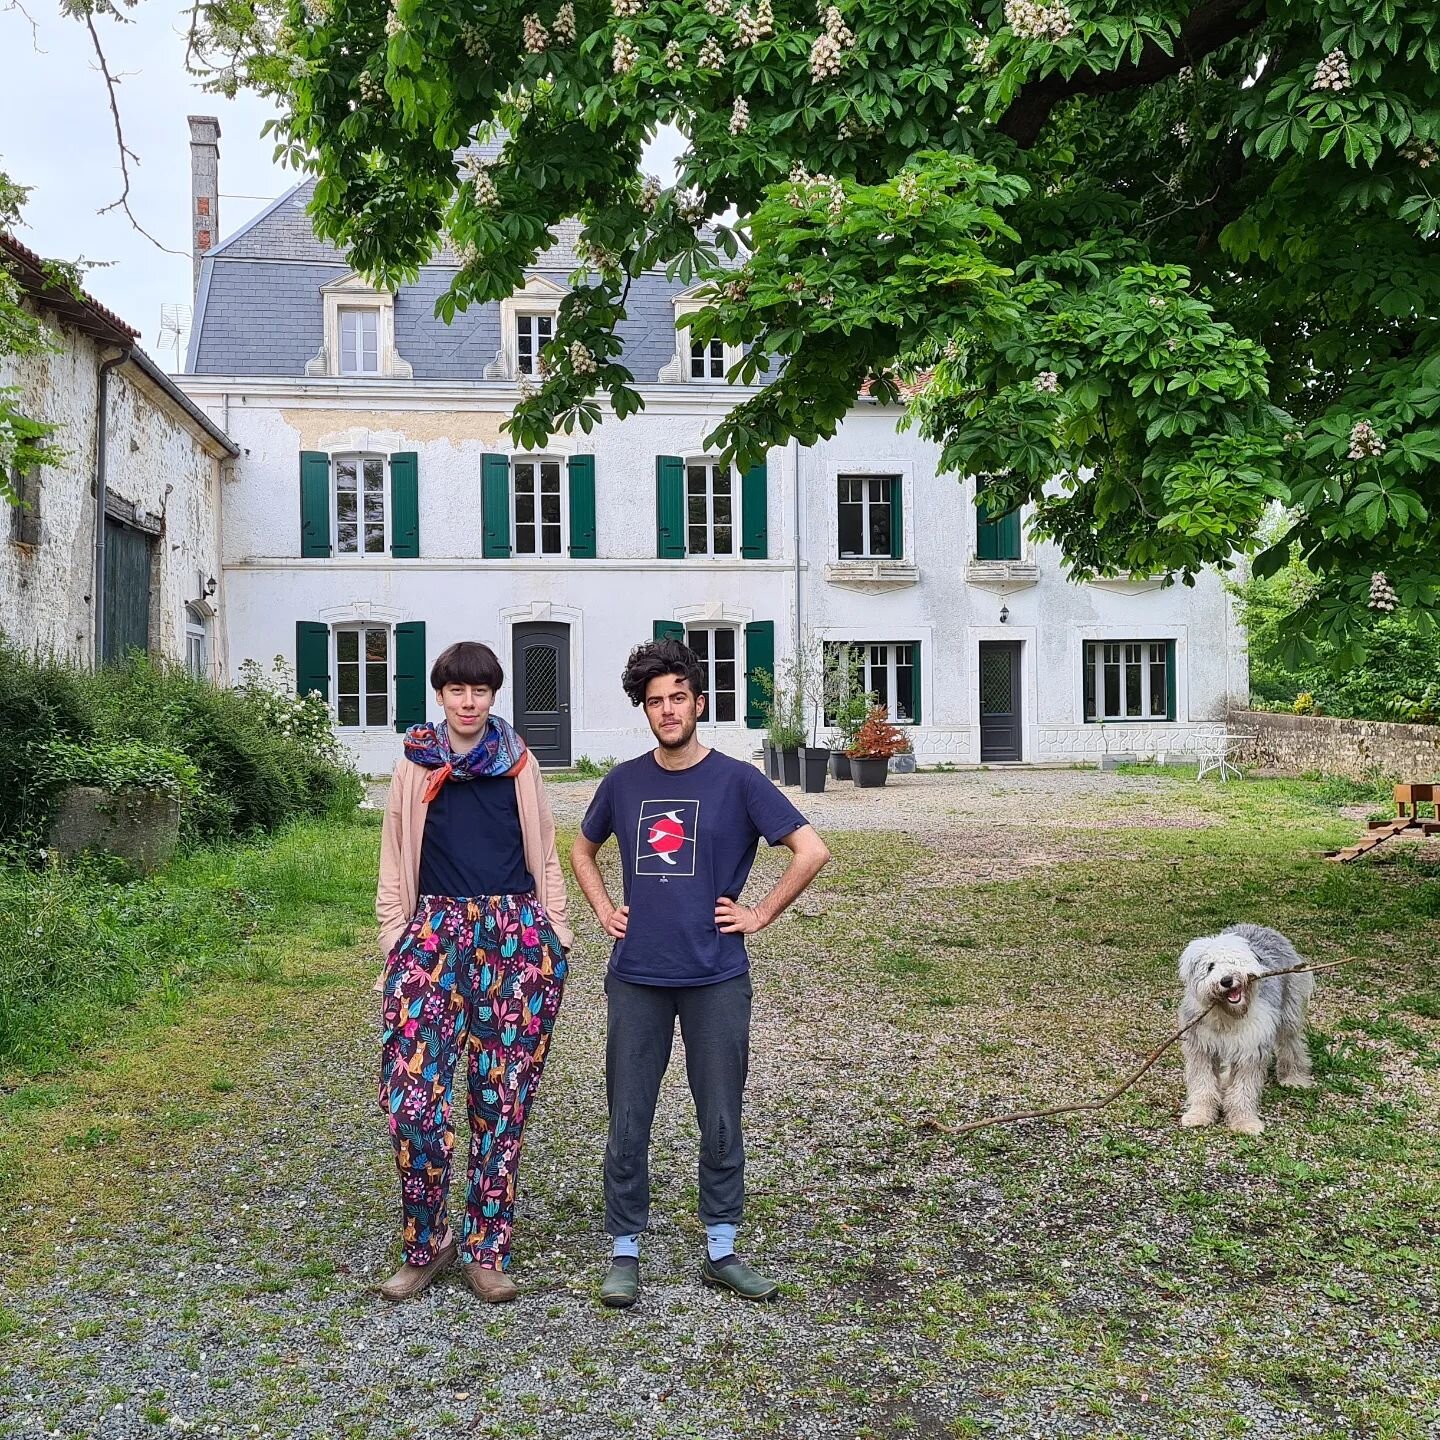 (ENG) Hi! We're Tom (they/he) and Sol&egrave;ne/Sol (they/she), the owners of the Ch&acirc;teau de Paran&ccedil;ay since 2020. After 2 years of renovation we opened in late 2022.

Originally from Paris for Tom and Brittany for Sol&egrave;ne, we left 